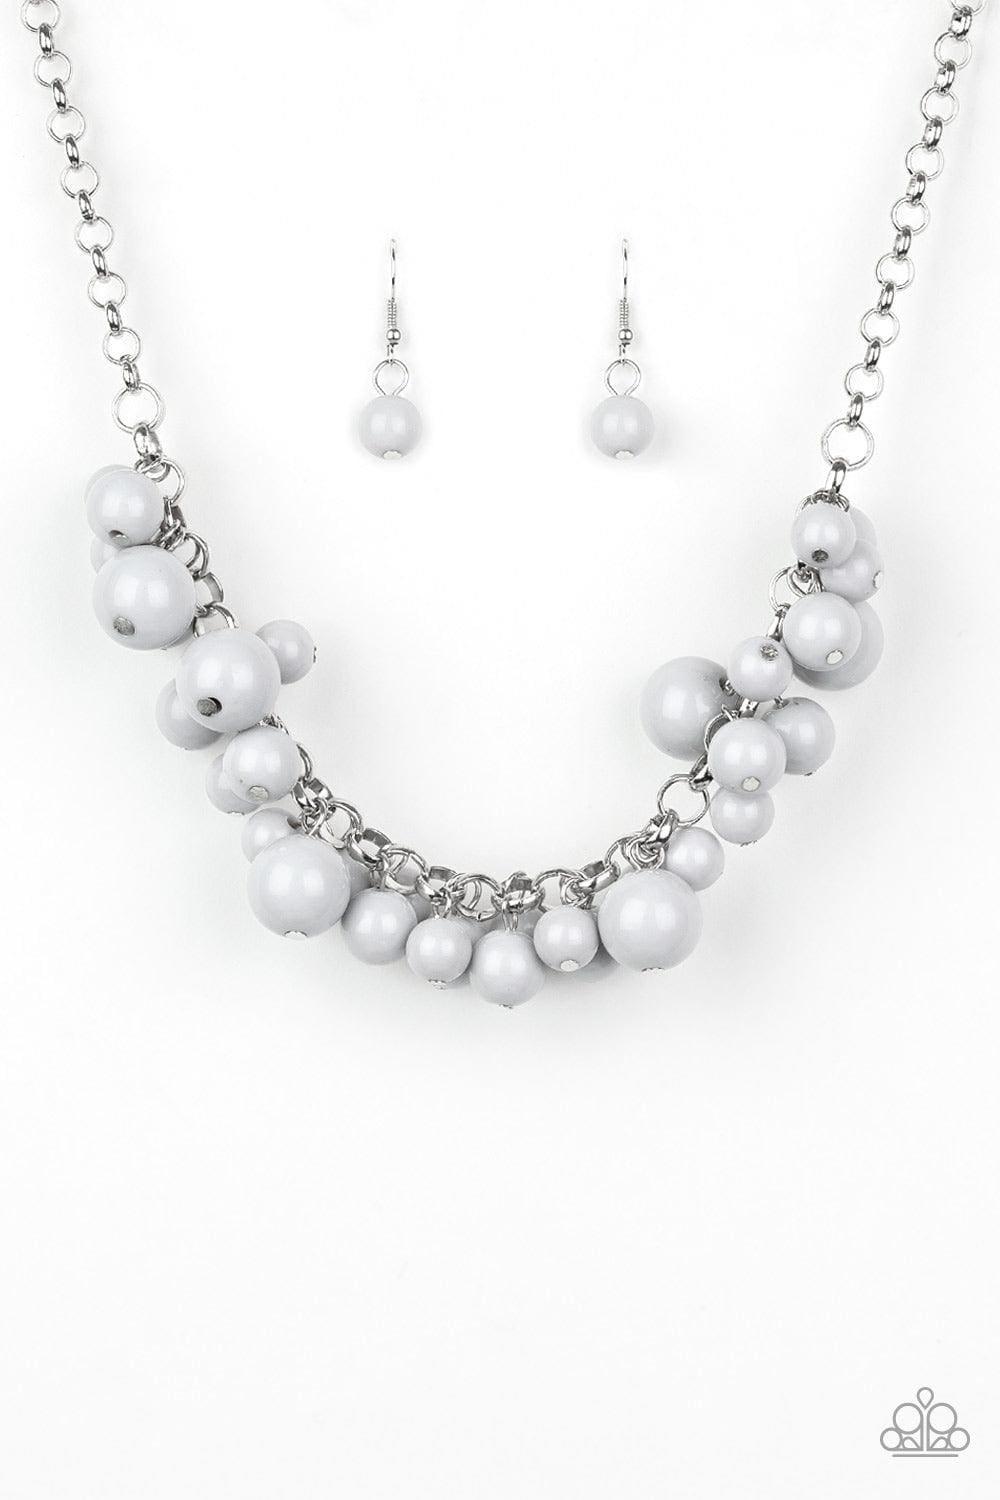 Paparazzi Accessories - Walk This Broadway - Silver Necklace - Bling by JessieK